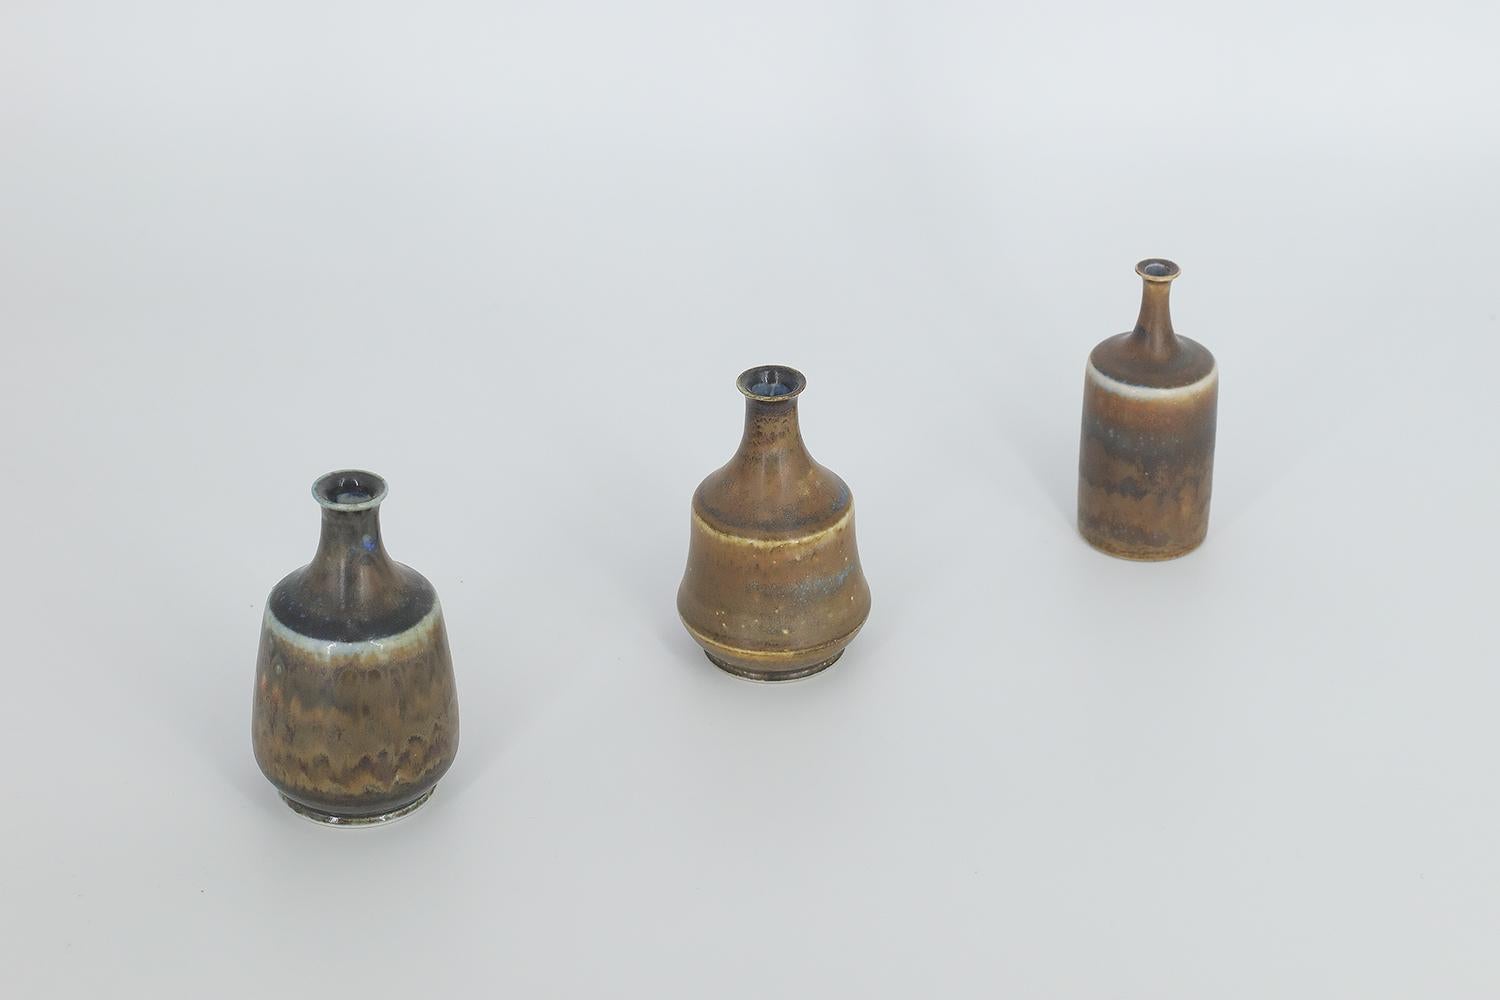 1. Height 9 cm | Width 5 cm | Depth 5 cm
2. Height 8 cm | Width 5 cm | Depth 5 cm
3. Height 8 cm | Width 3.5 cm | Depth 3.5 cm

This set of 3 miniature vases was designed by Gunnar Borg for the Swedish manufacture Höganäs Keramik during the 1960s.